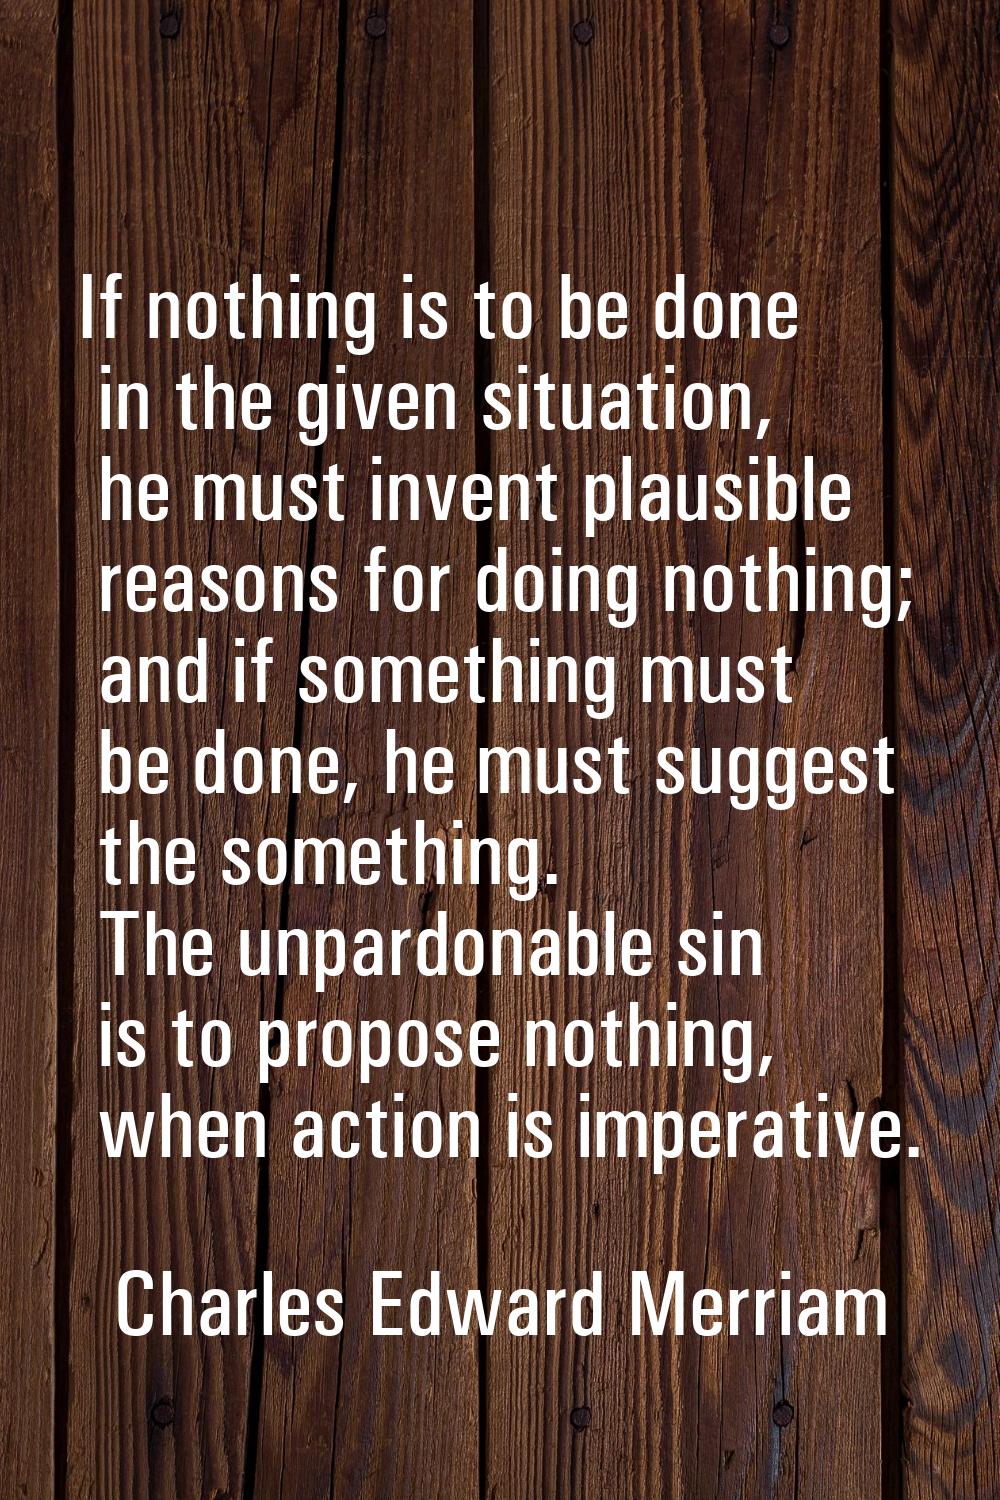 If nothing is to be done in the given situation, he must invent plausible reasons for doing nothing